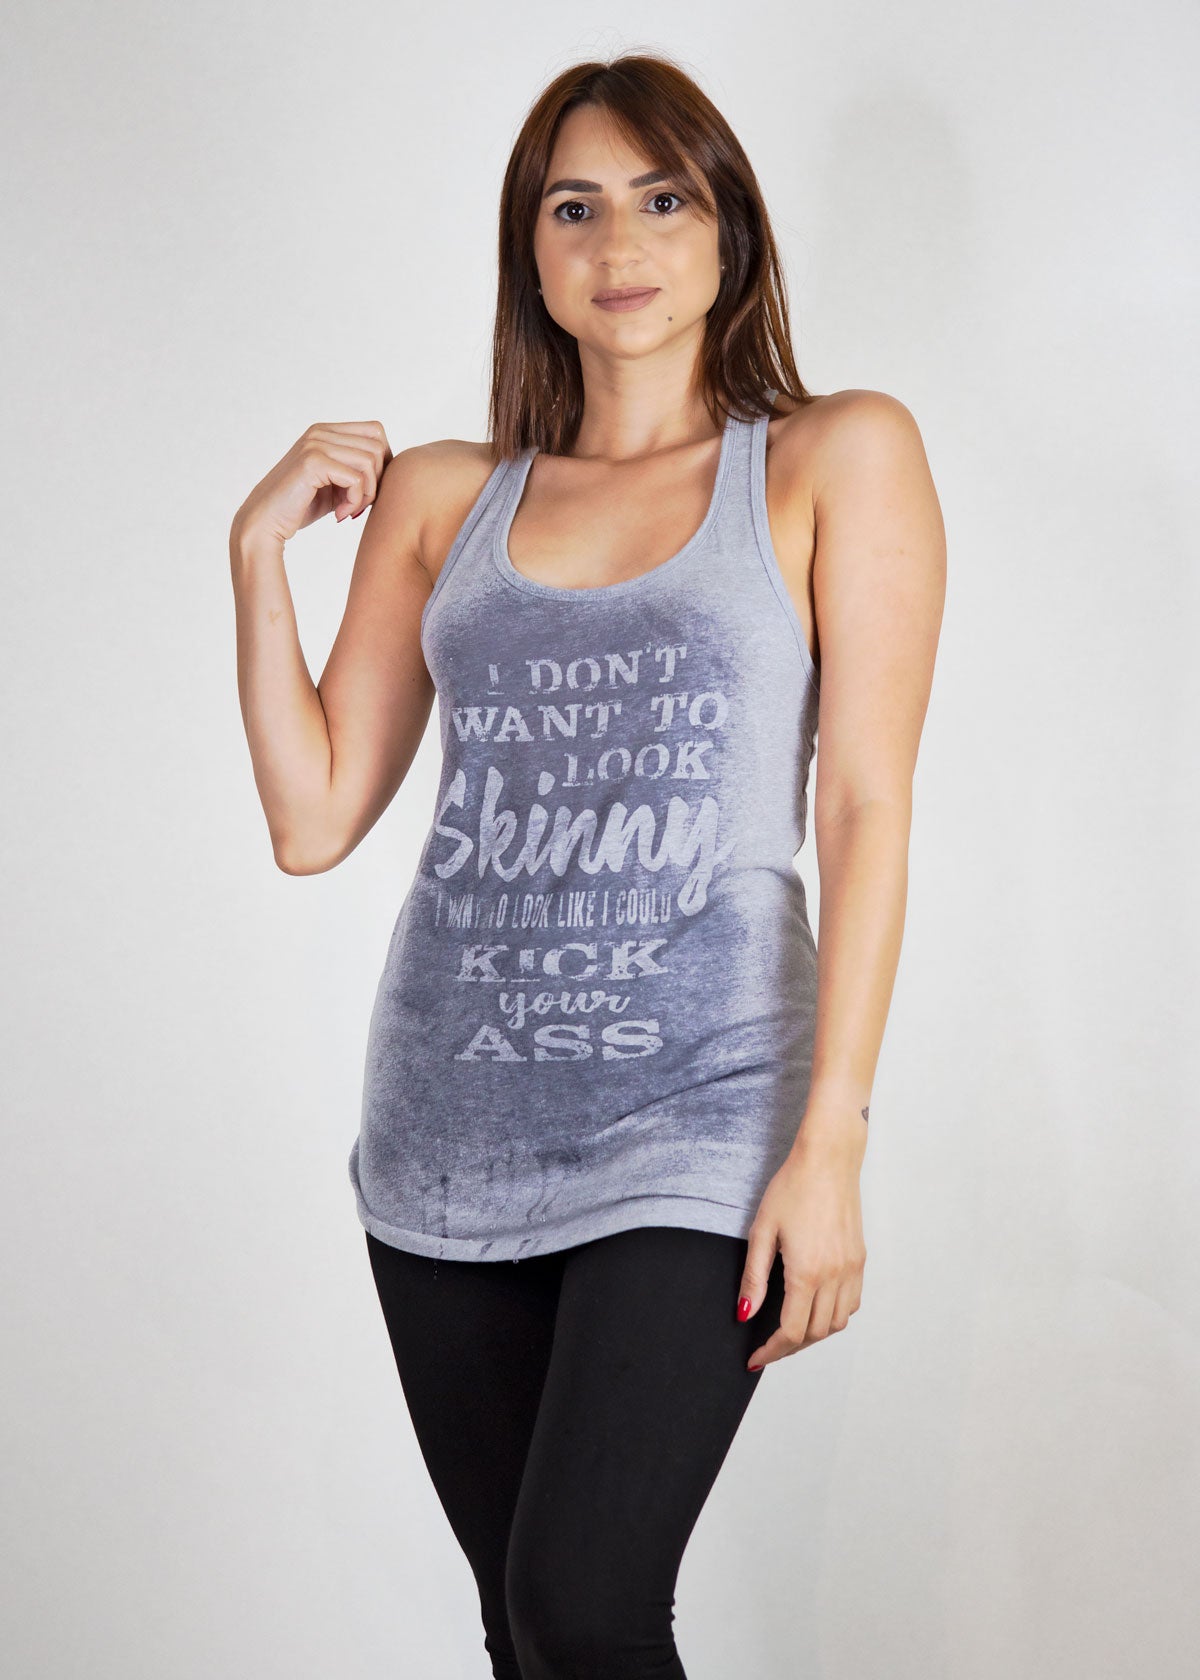 I don't want to look skinny funny tank top for women gym sweat activated